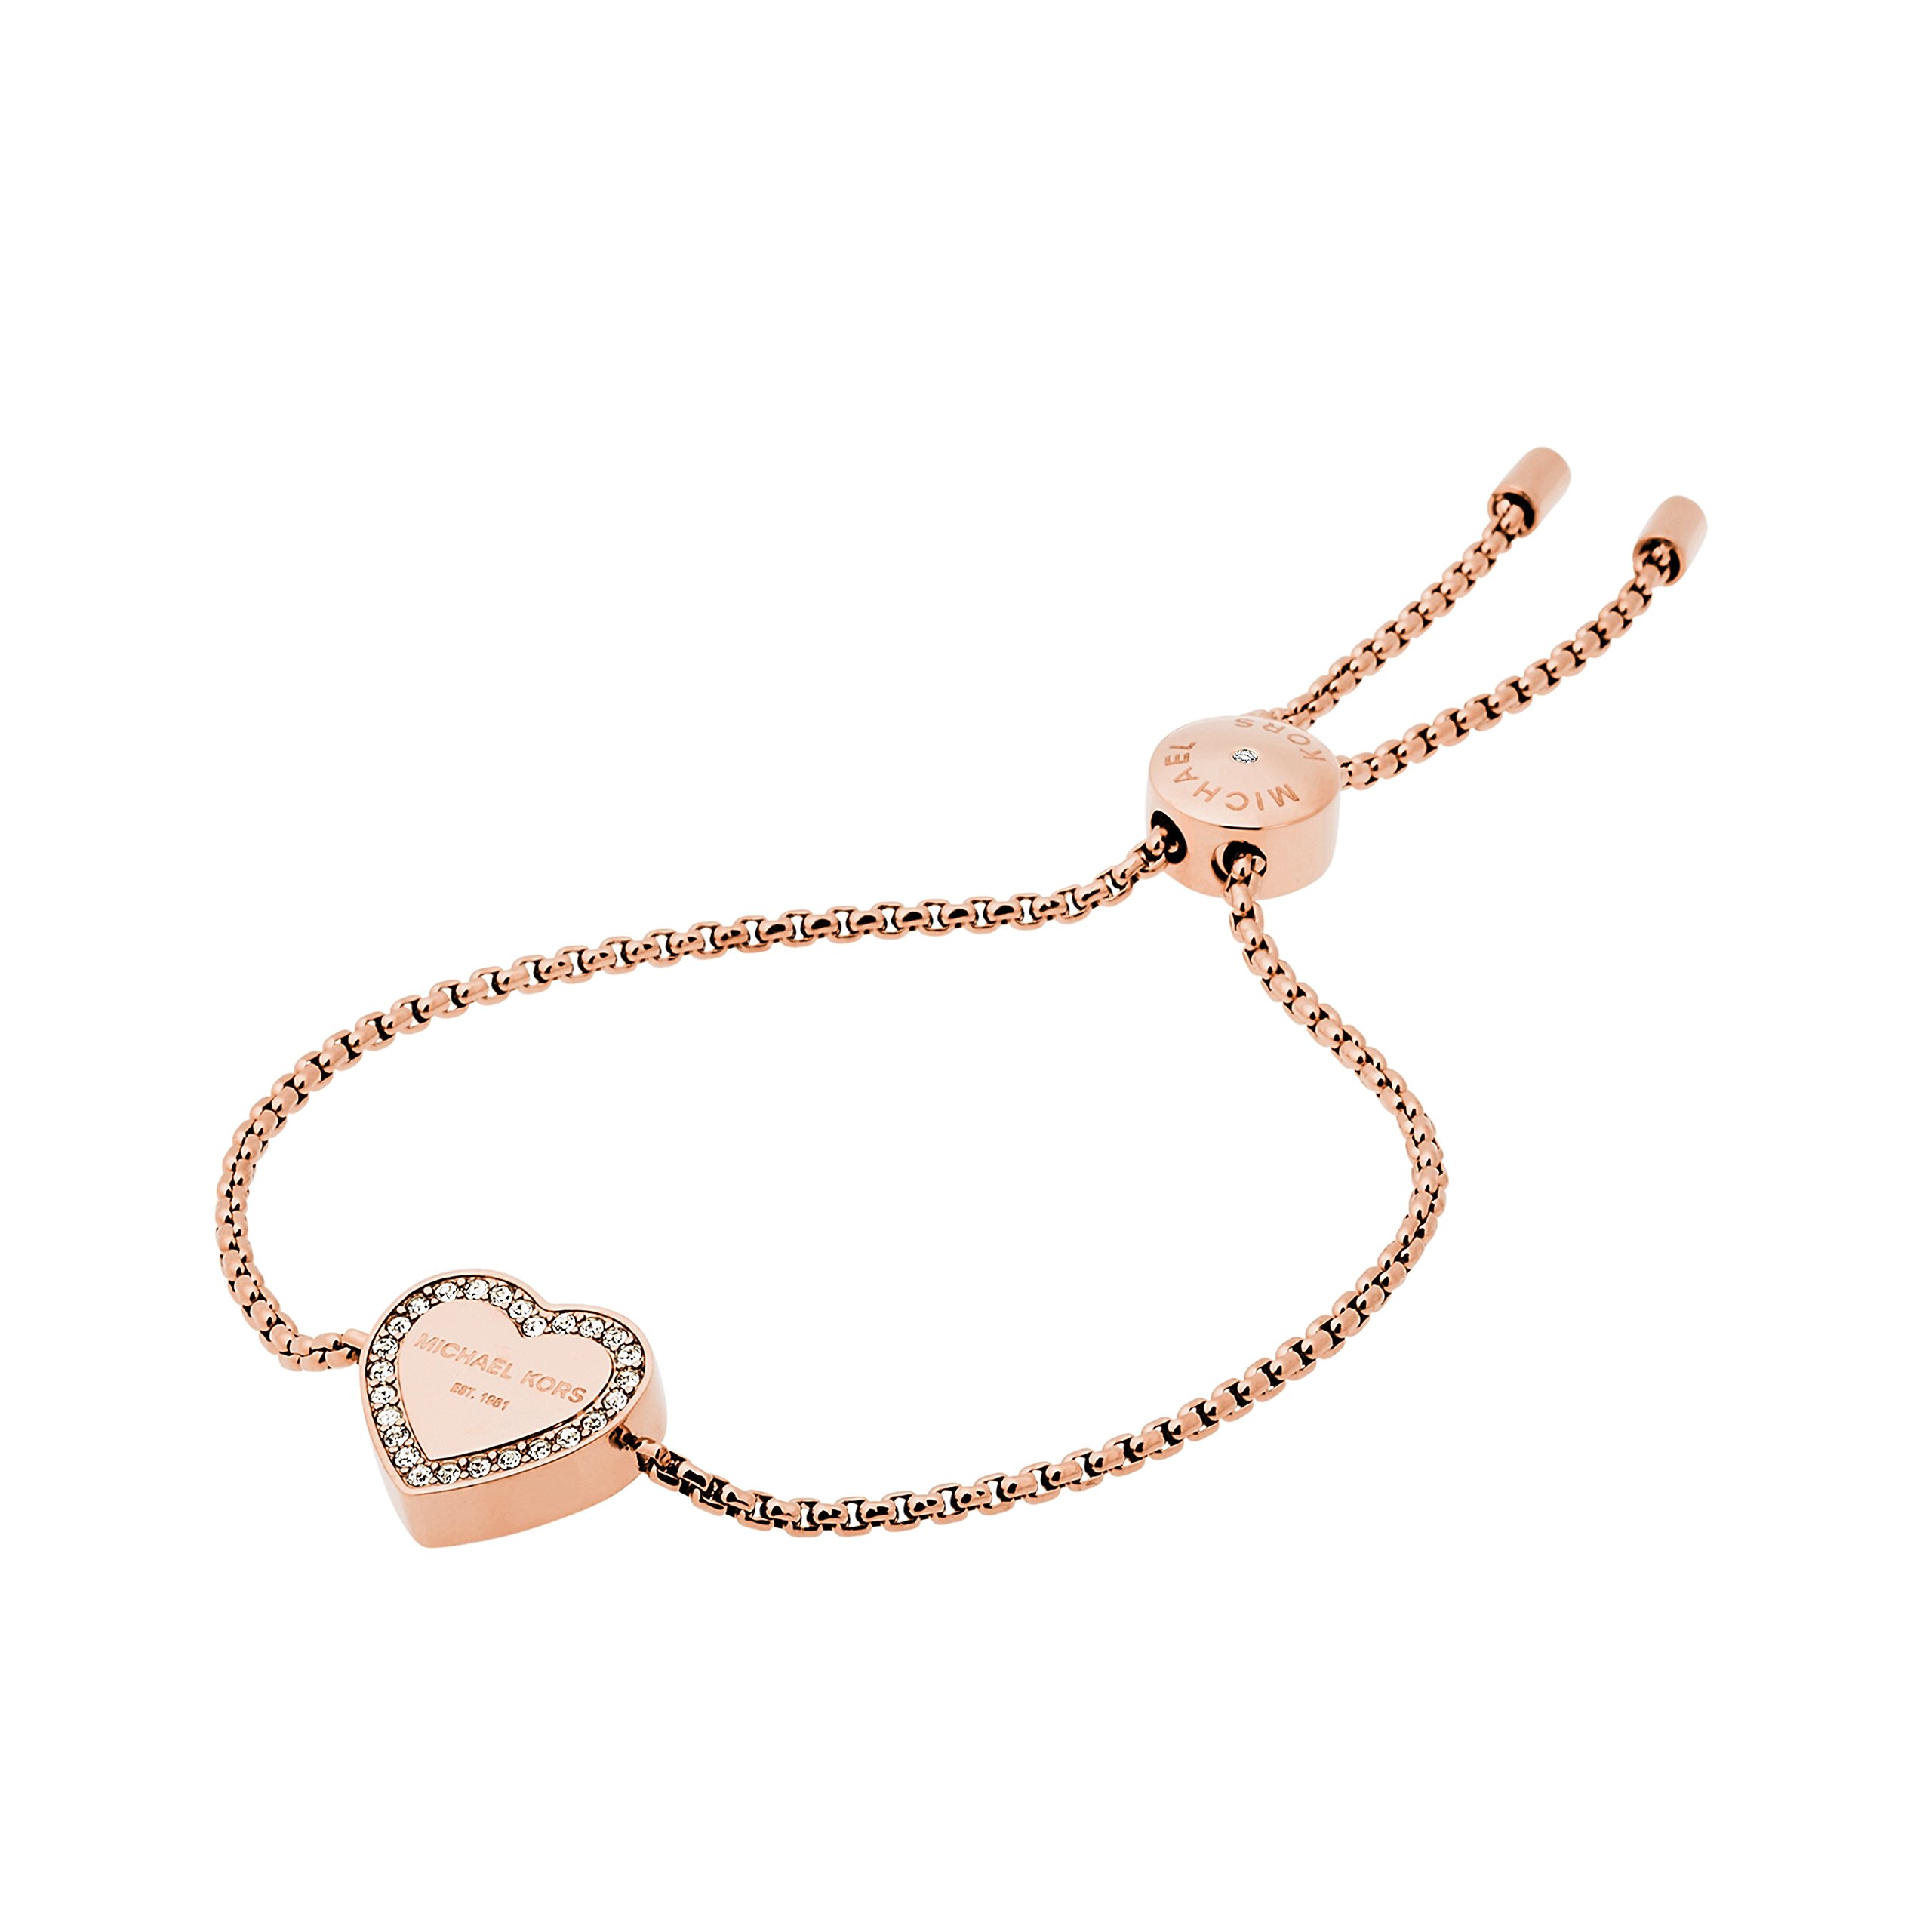 Michael Kors Women's Stainless Steel Rose Gold-Tone Slider Bracelet with Crystal Accents